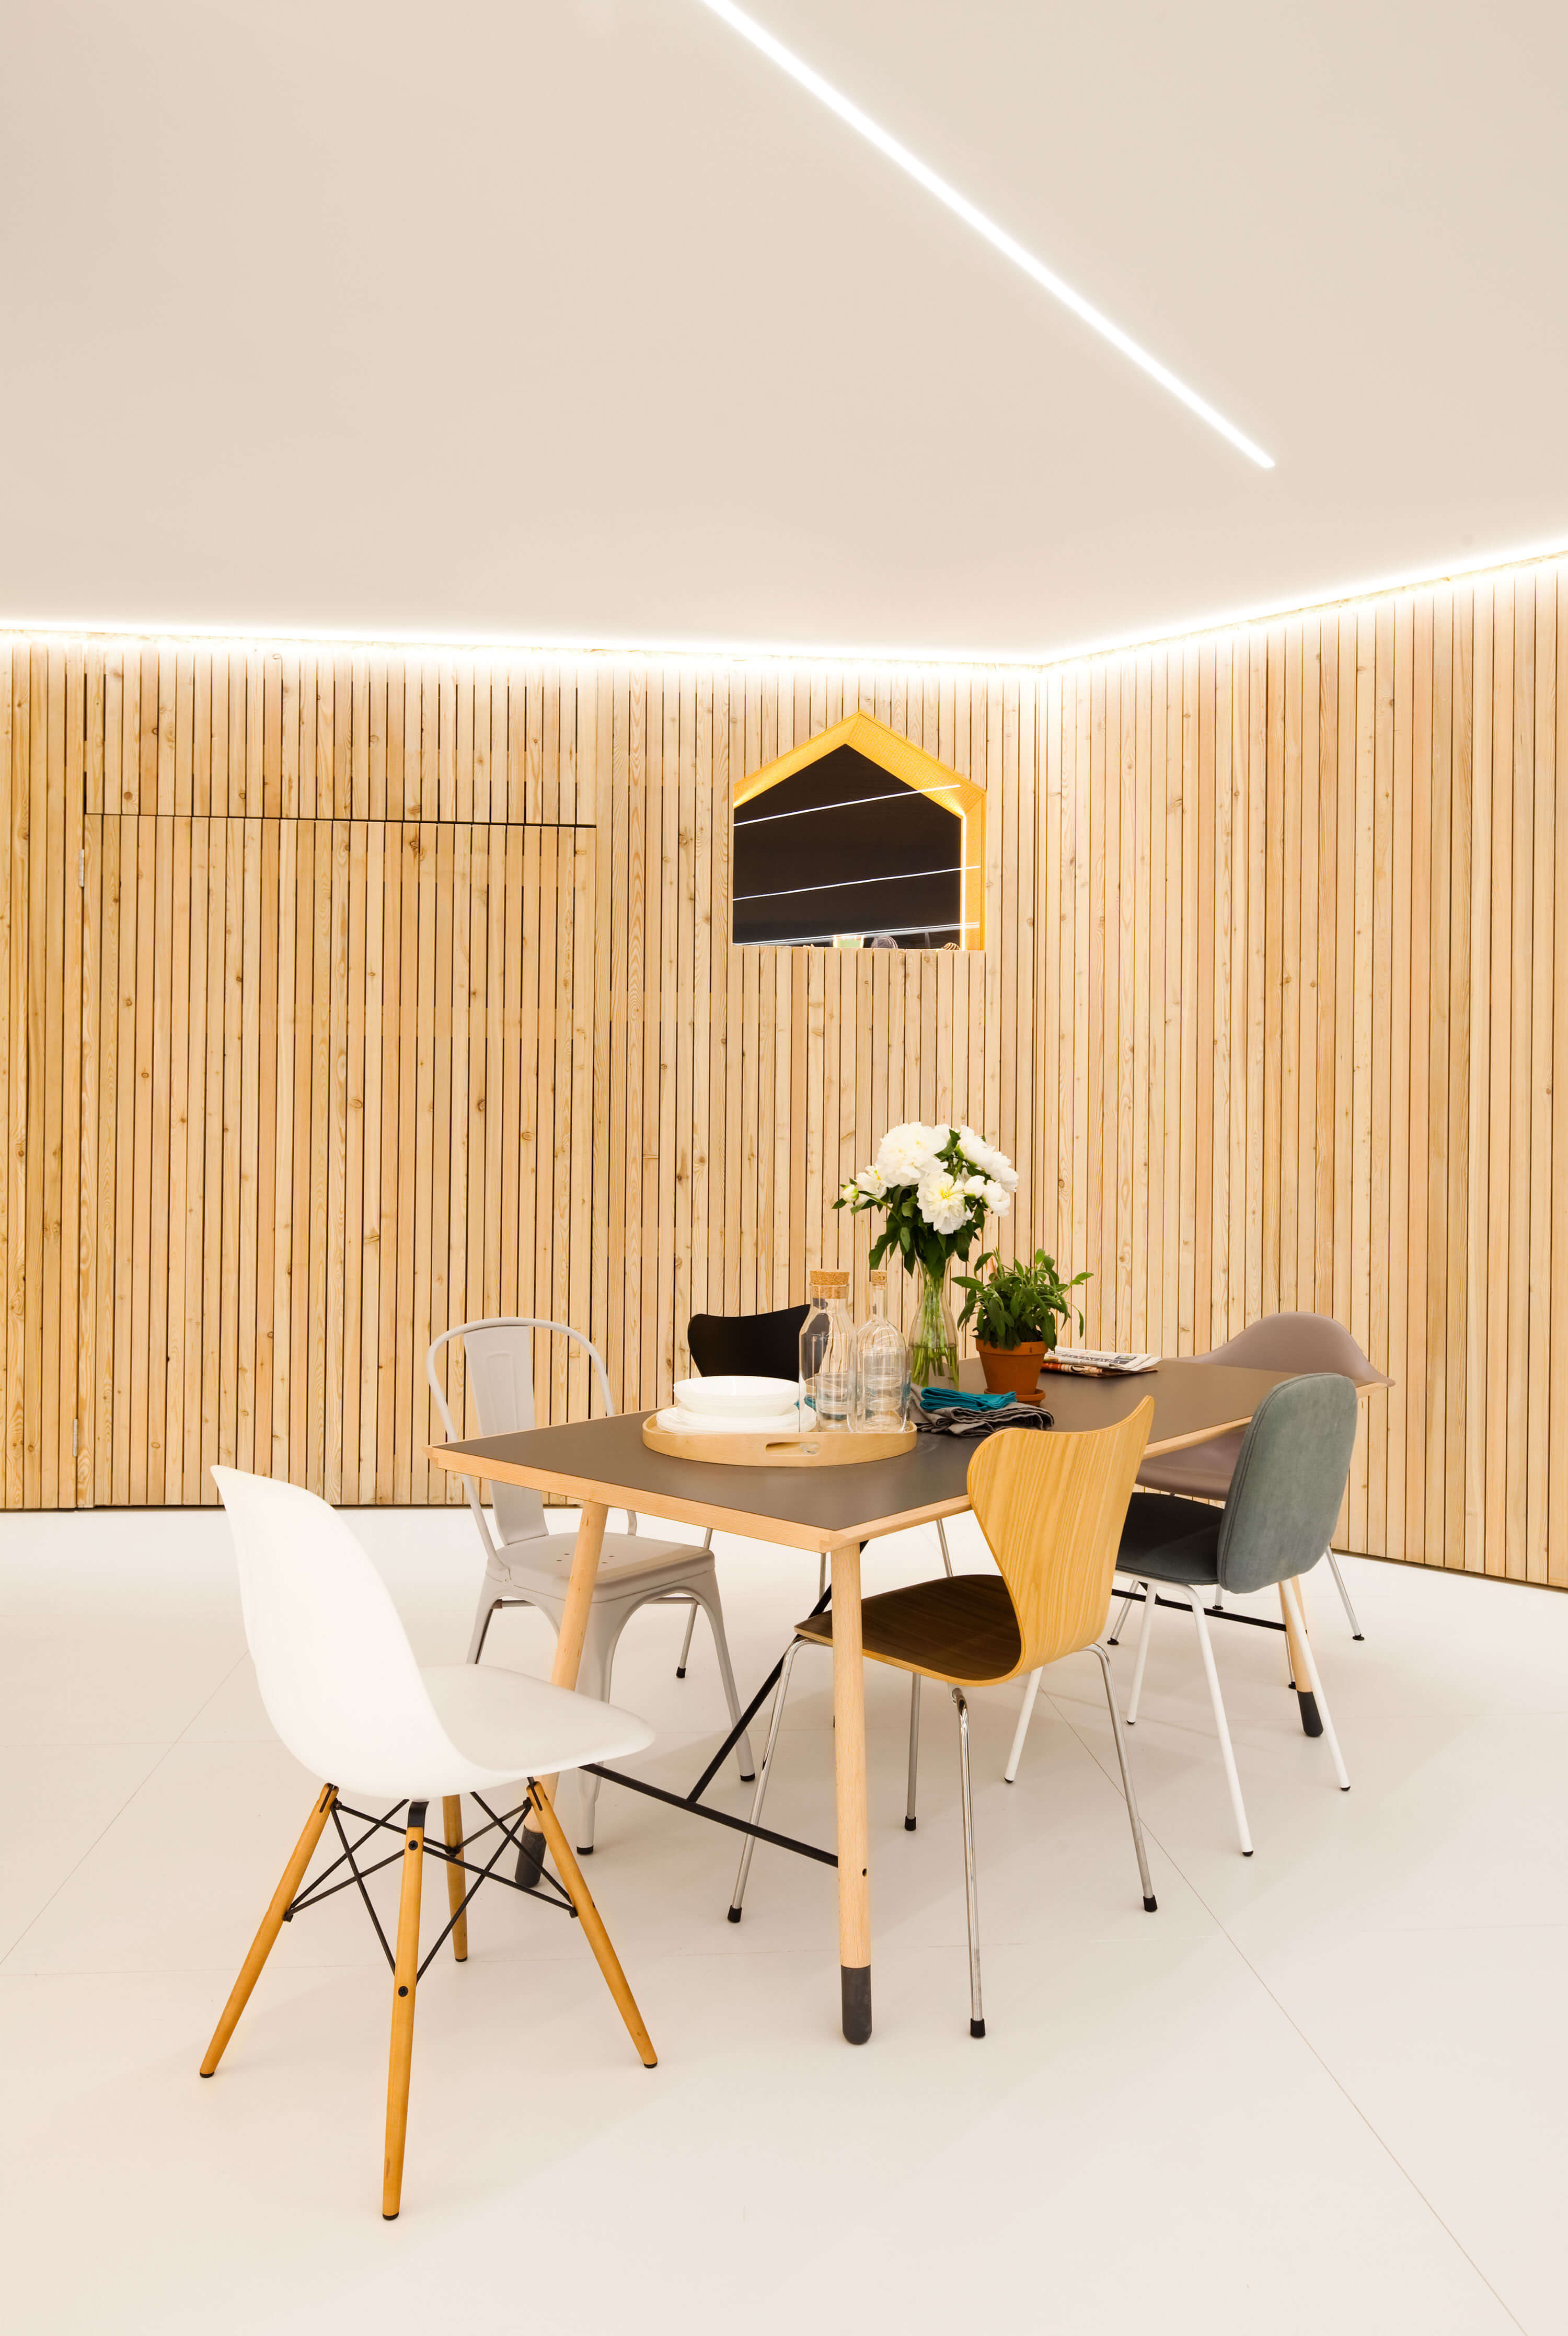 The wooden walls of the Mini Living: Do Disturb can be opened or closed